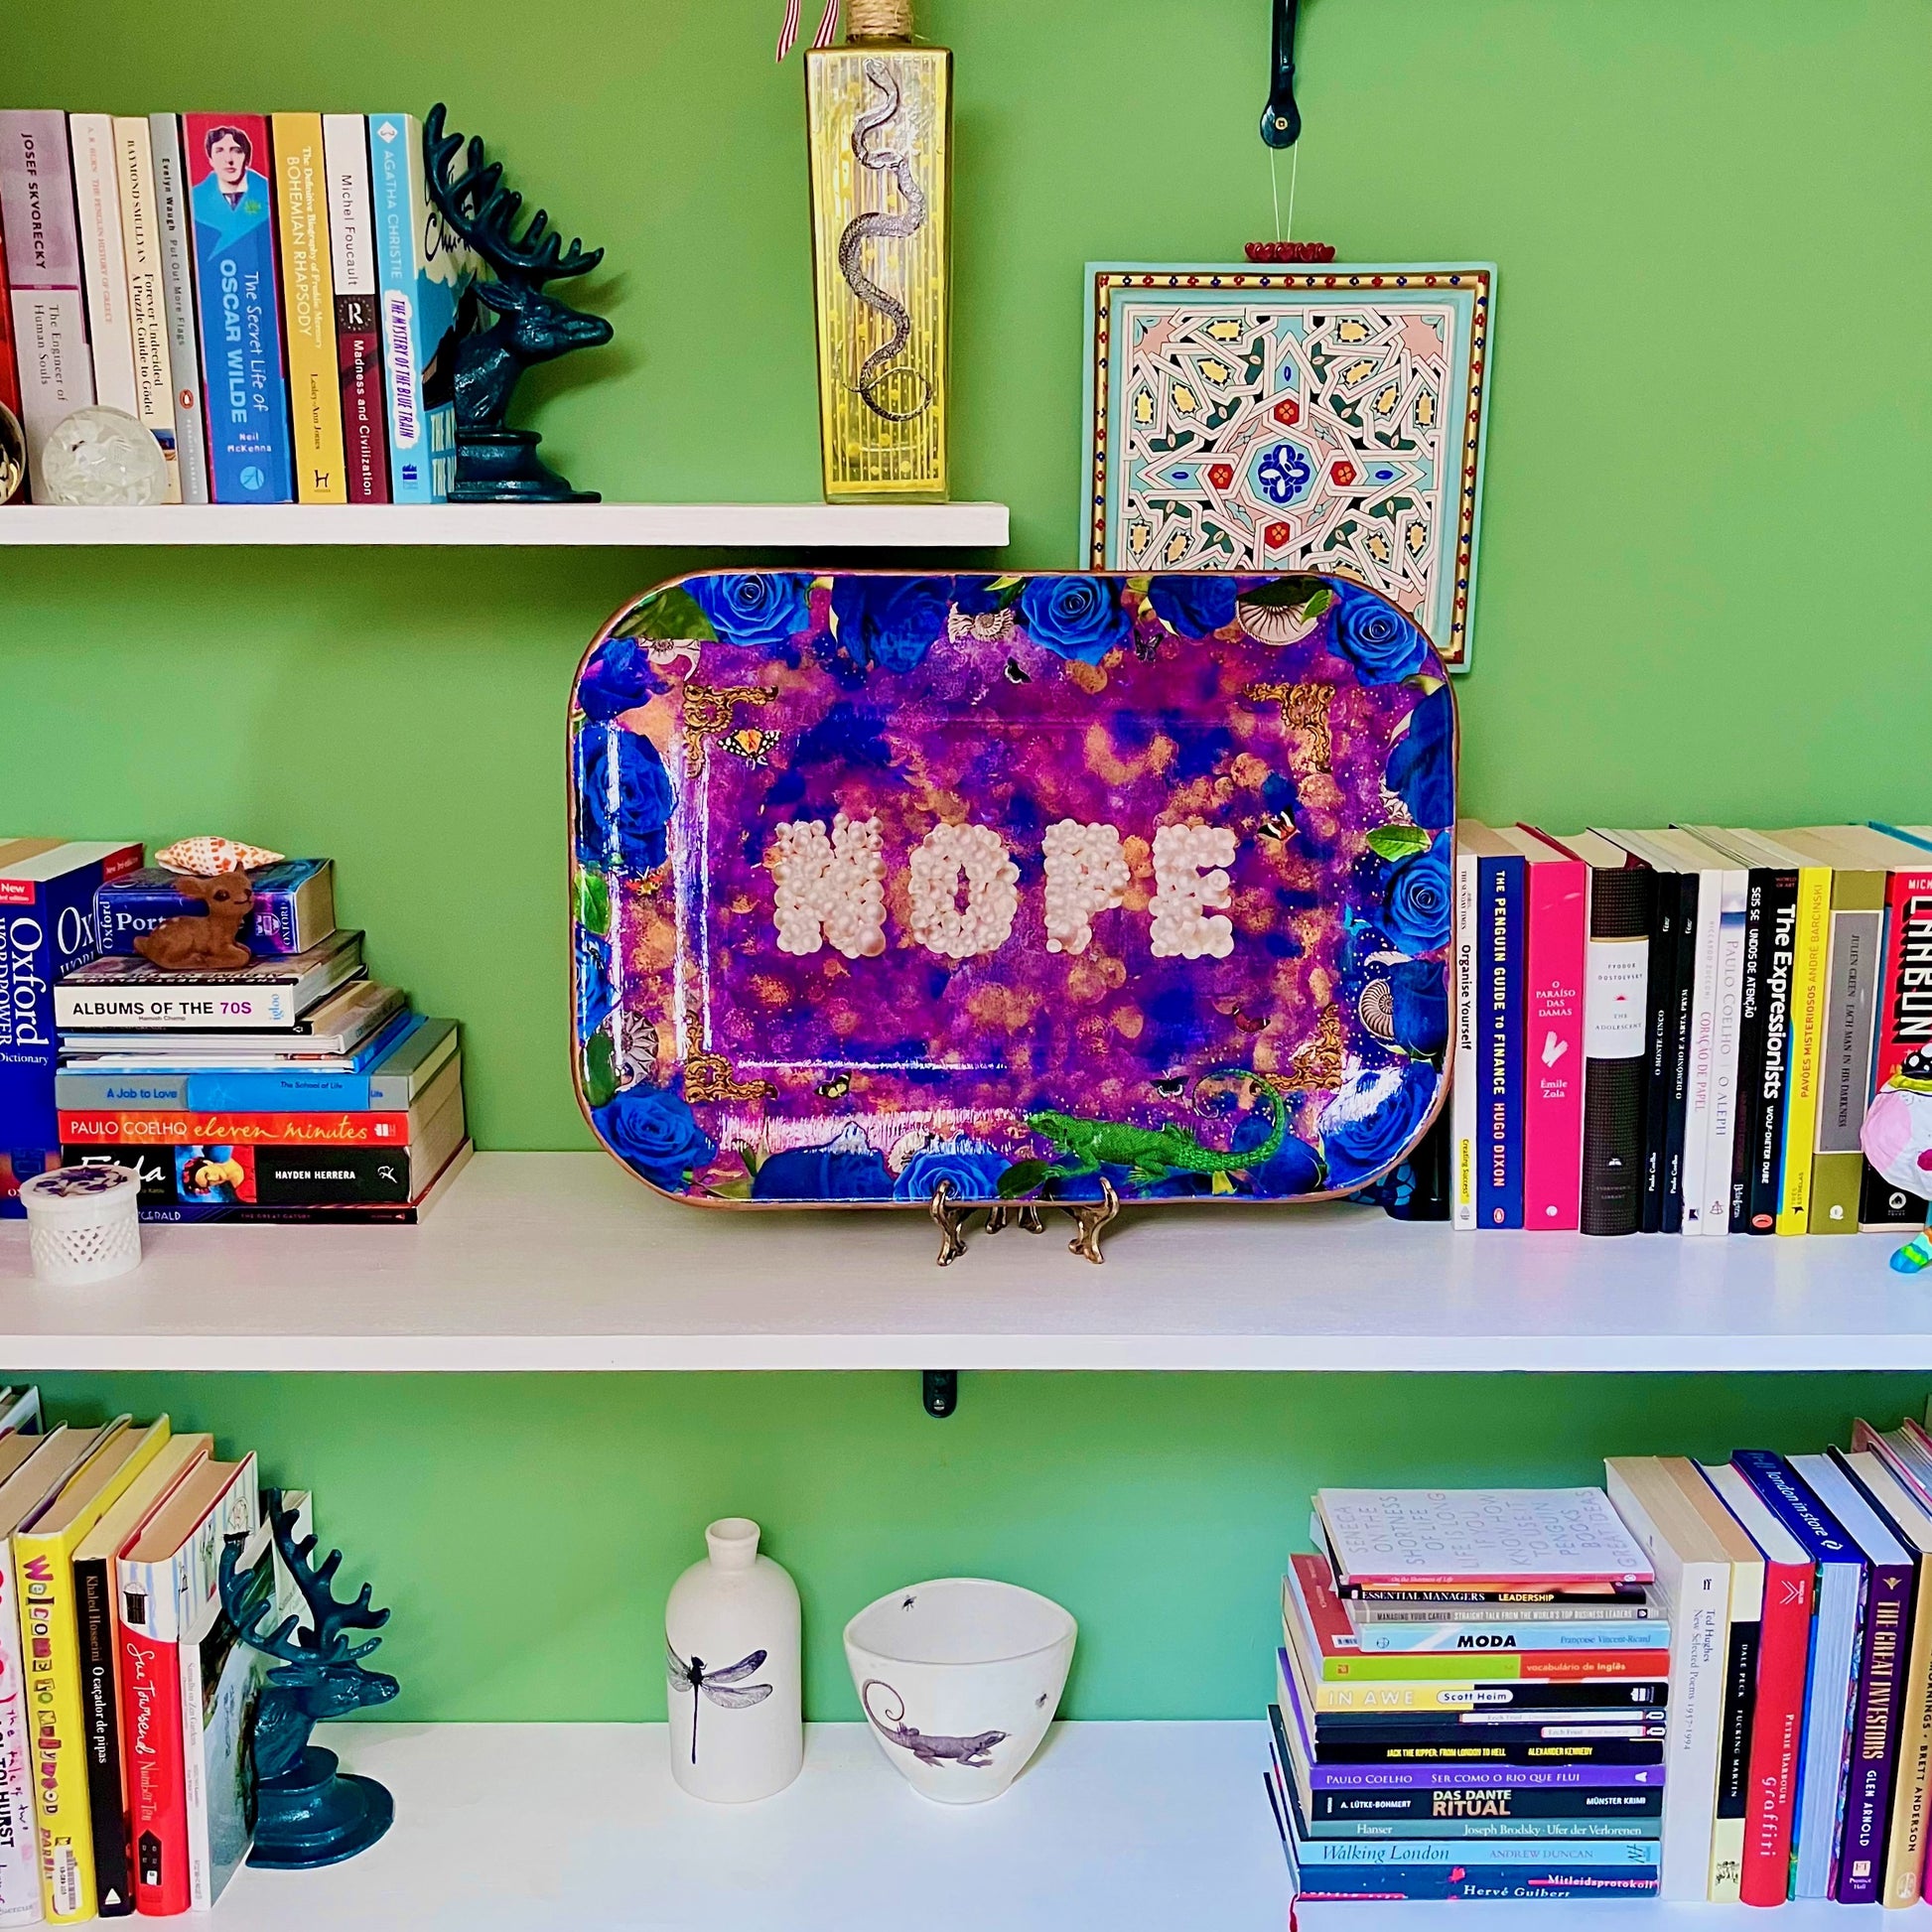 "Nope" Wall Plate by House of Frisson. Featuring the word "nope" written with pearls, framed by blue roses, shells, moths, and a lizard, on a  purple, blue and golden background. Lifestyle image showing plate on a plate stand resting on a bookshelf.